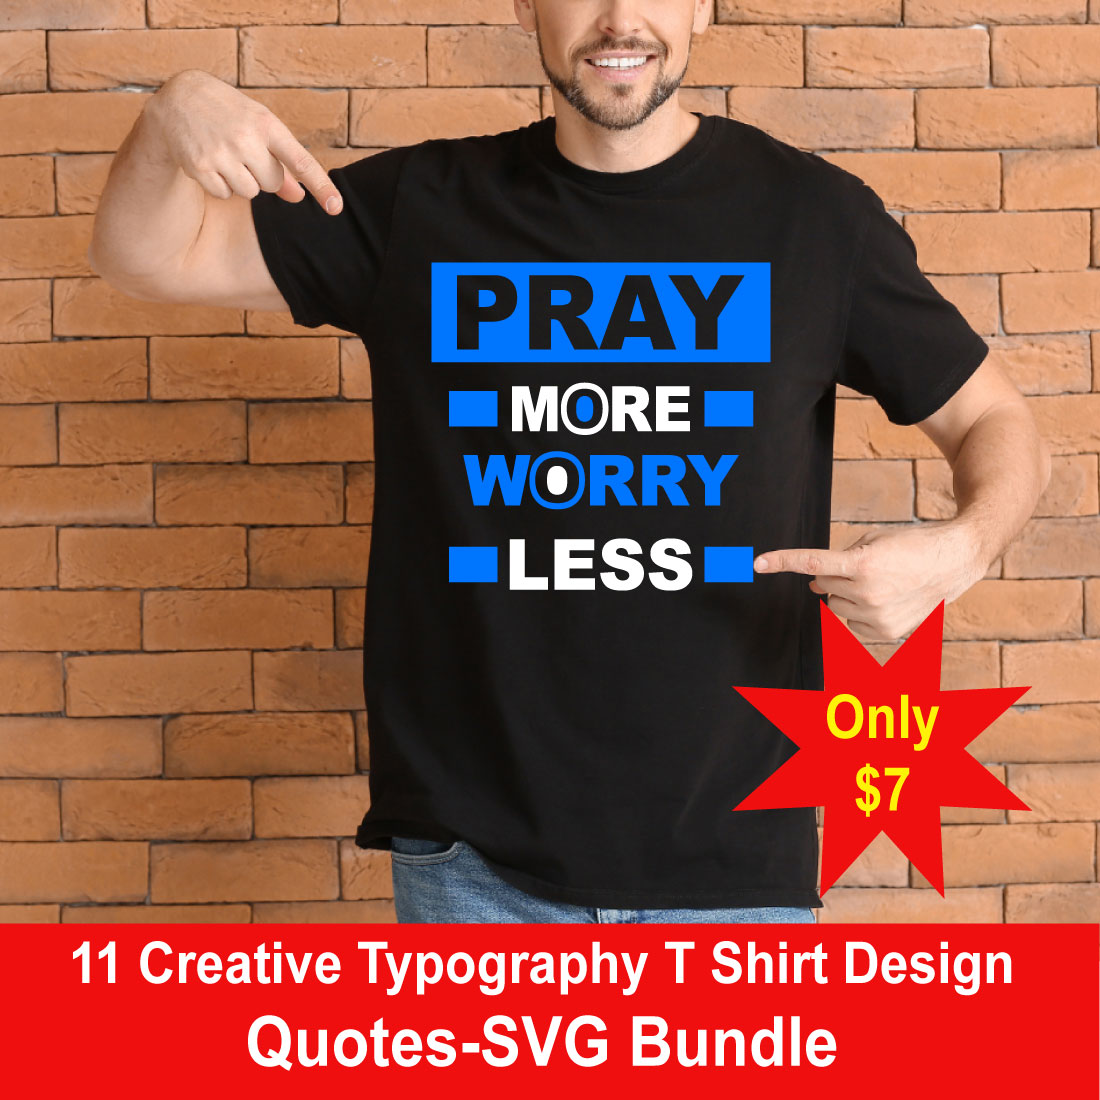 T-shirt Creative Typography Design Quotes cover image.